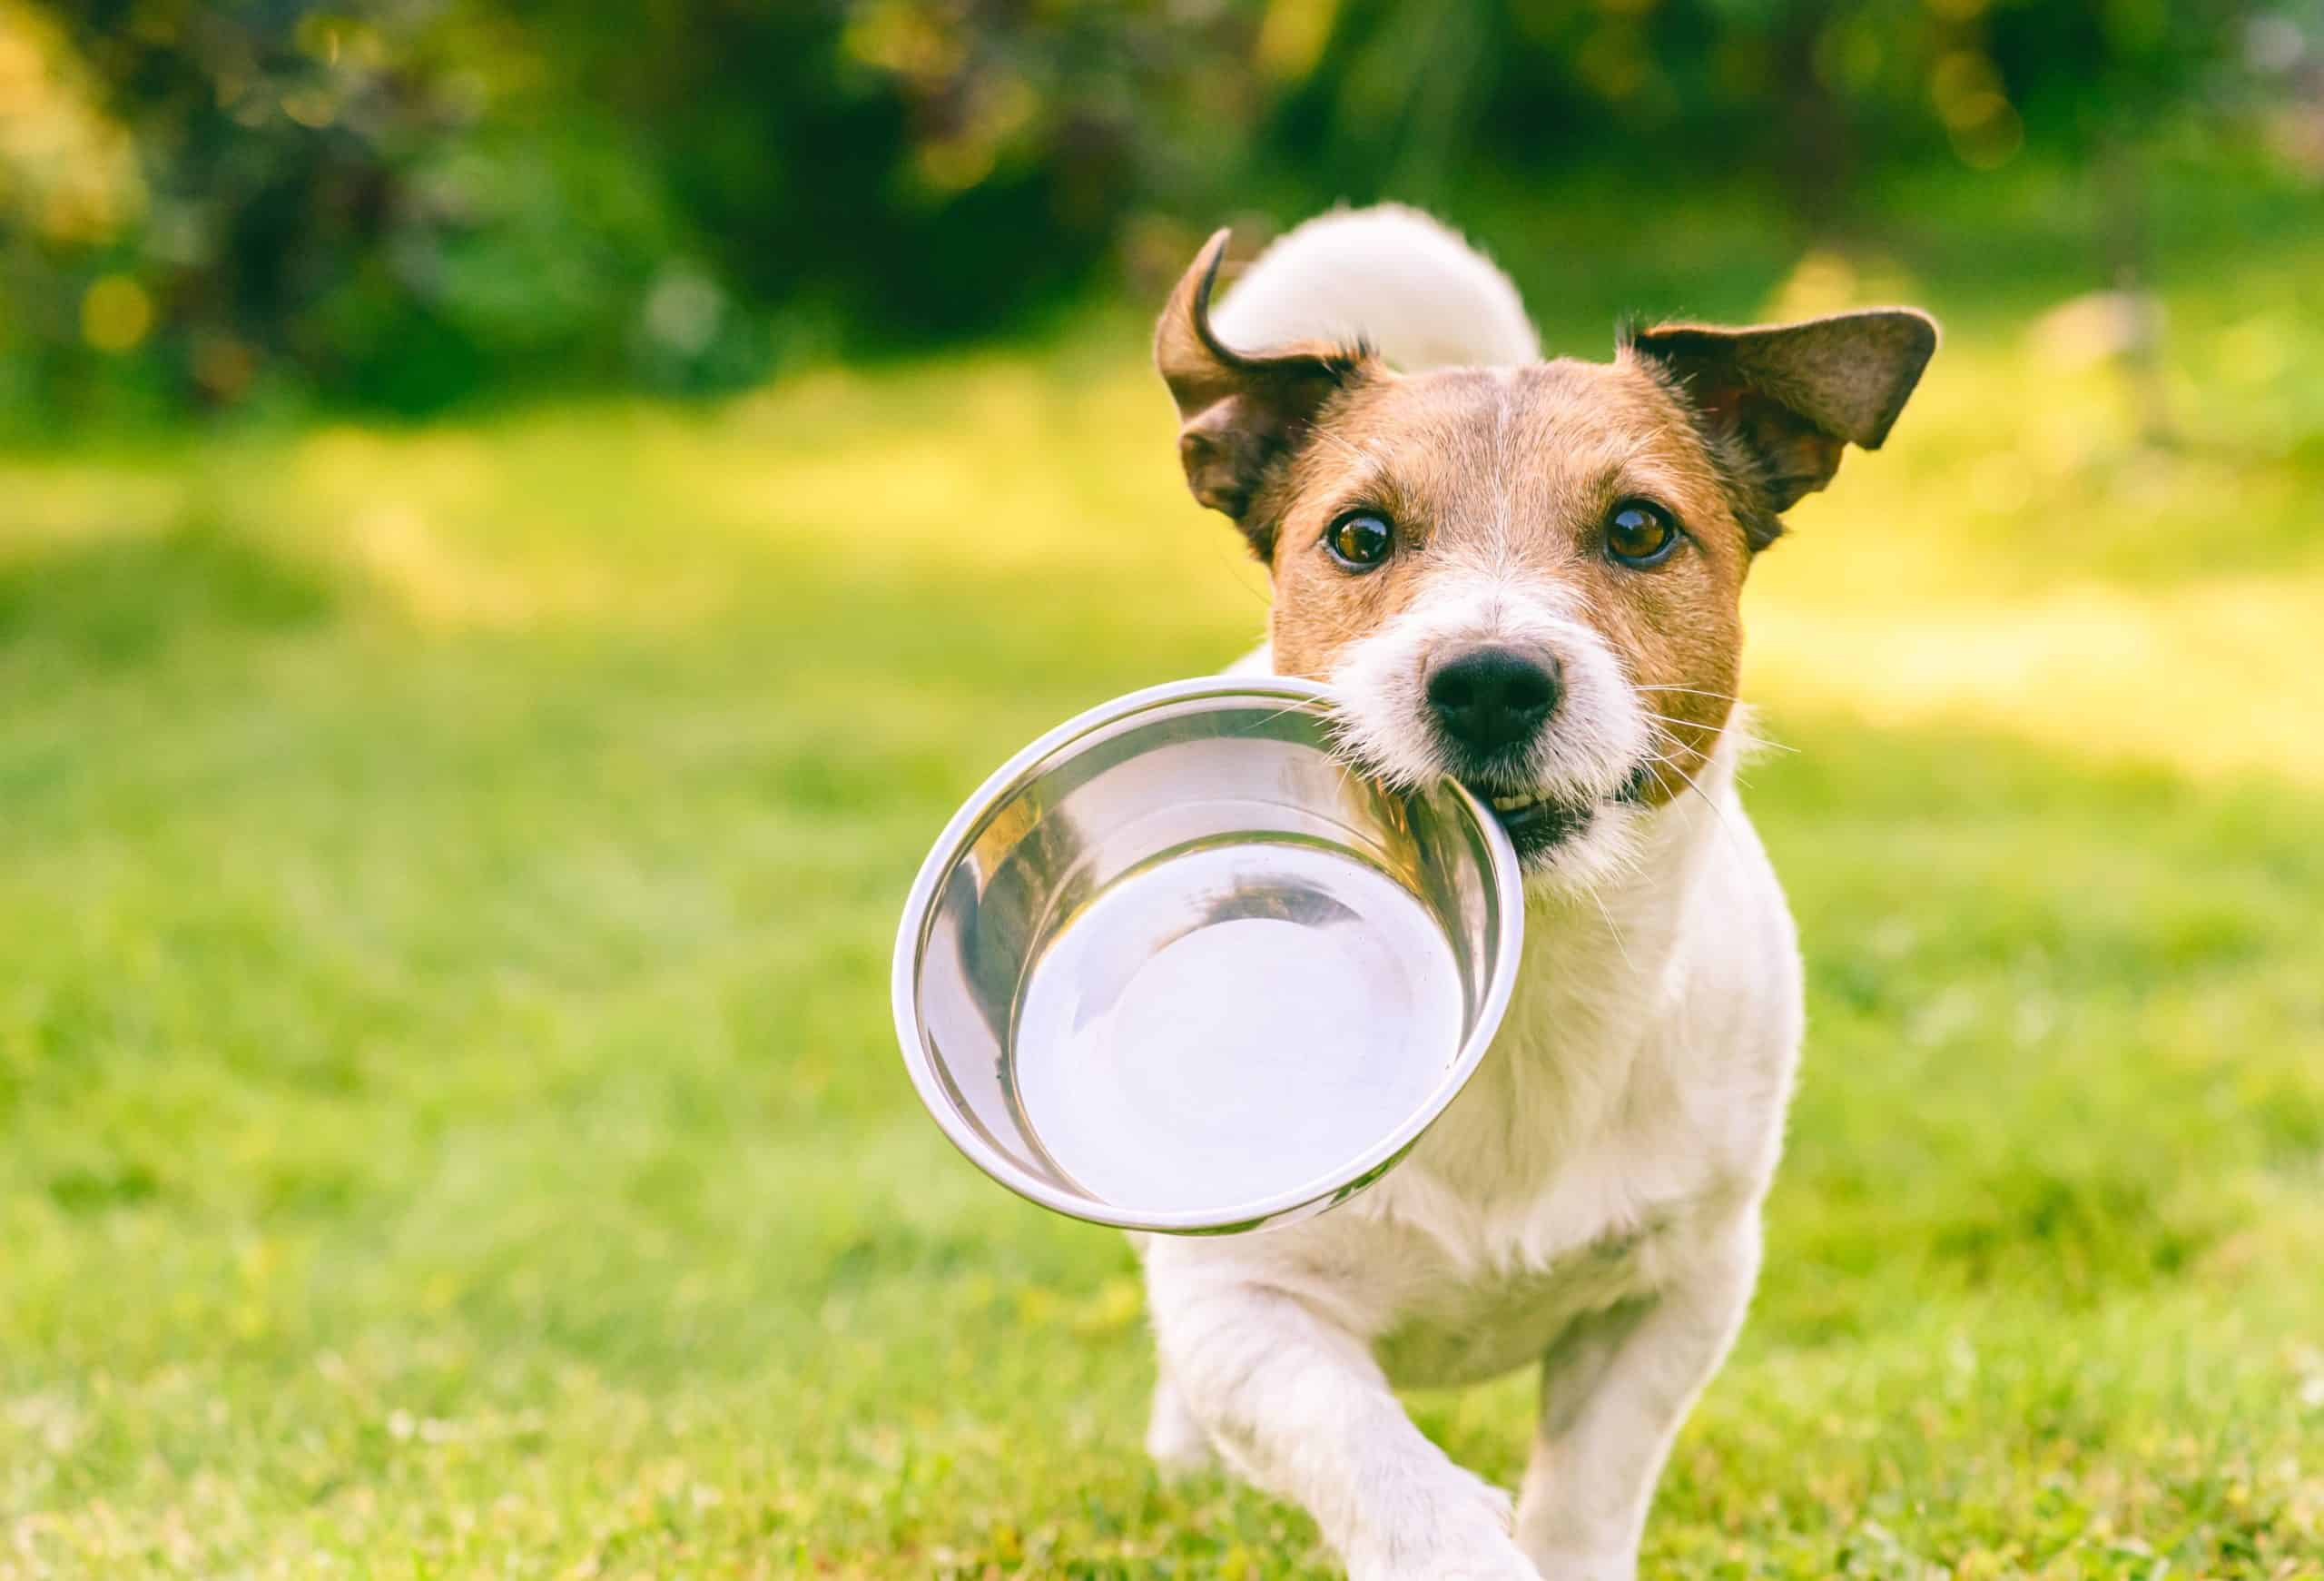 Dog carrying a stainless steel food bowl